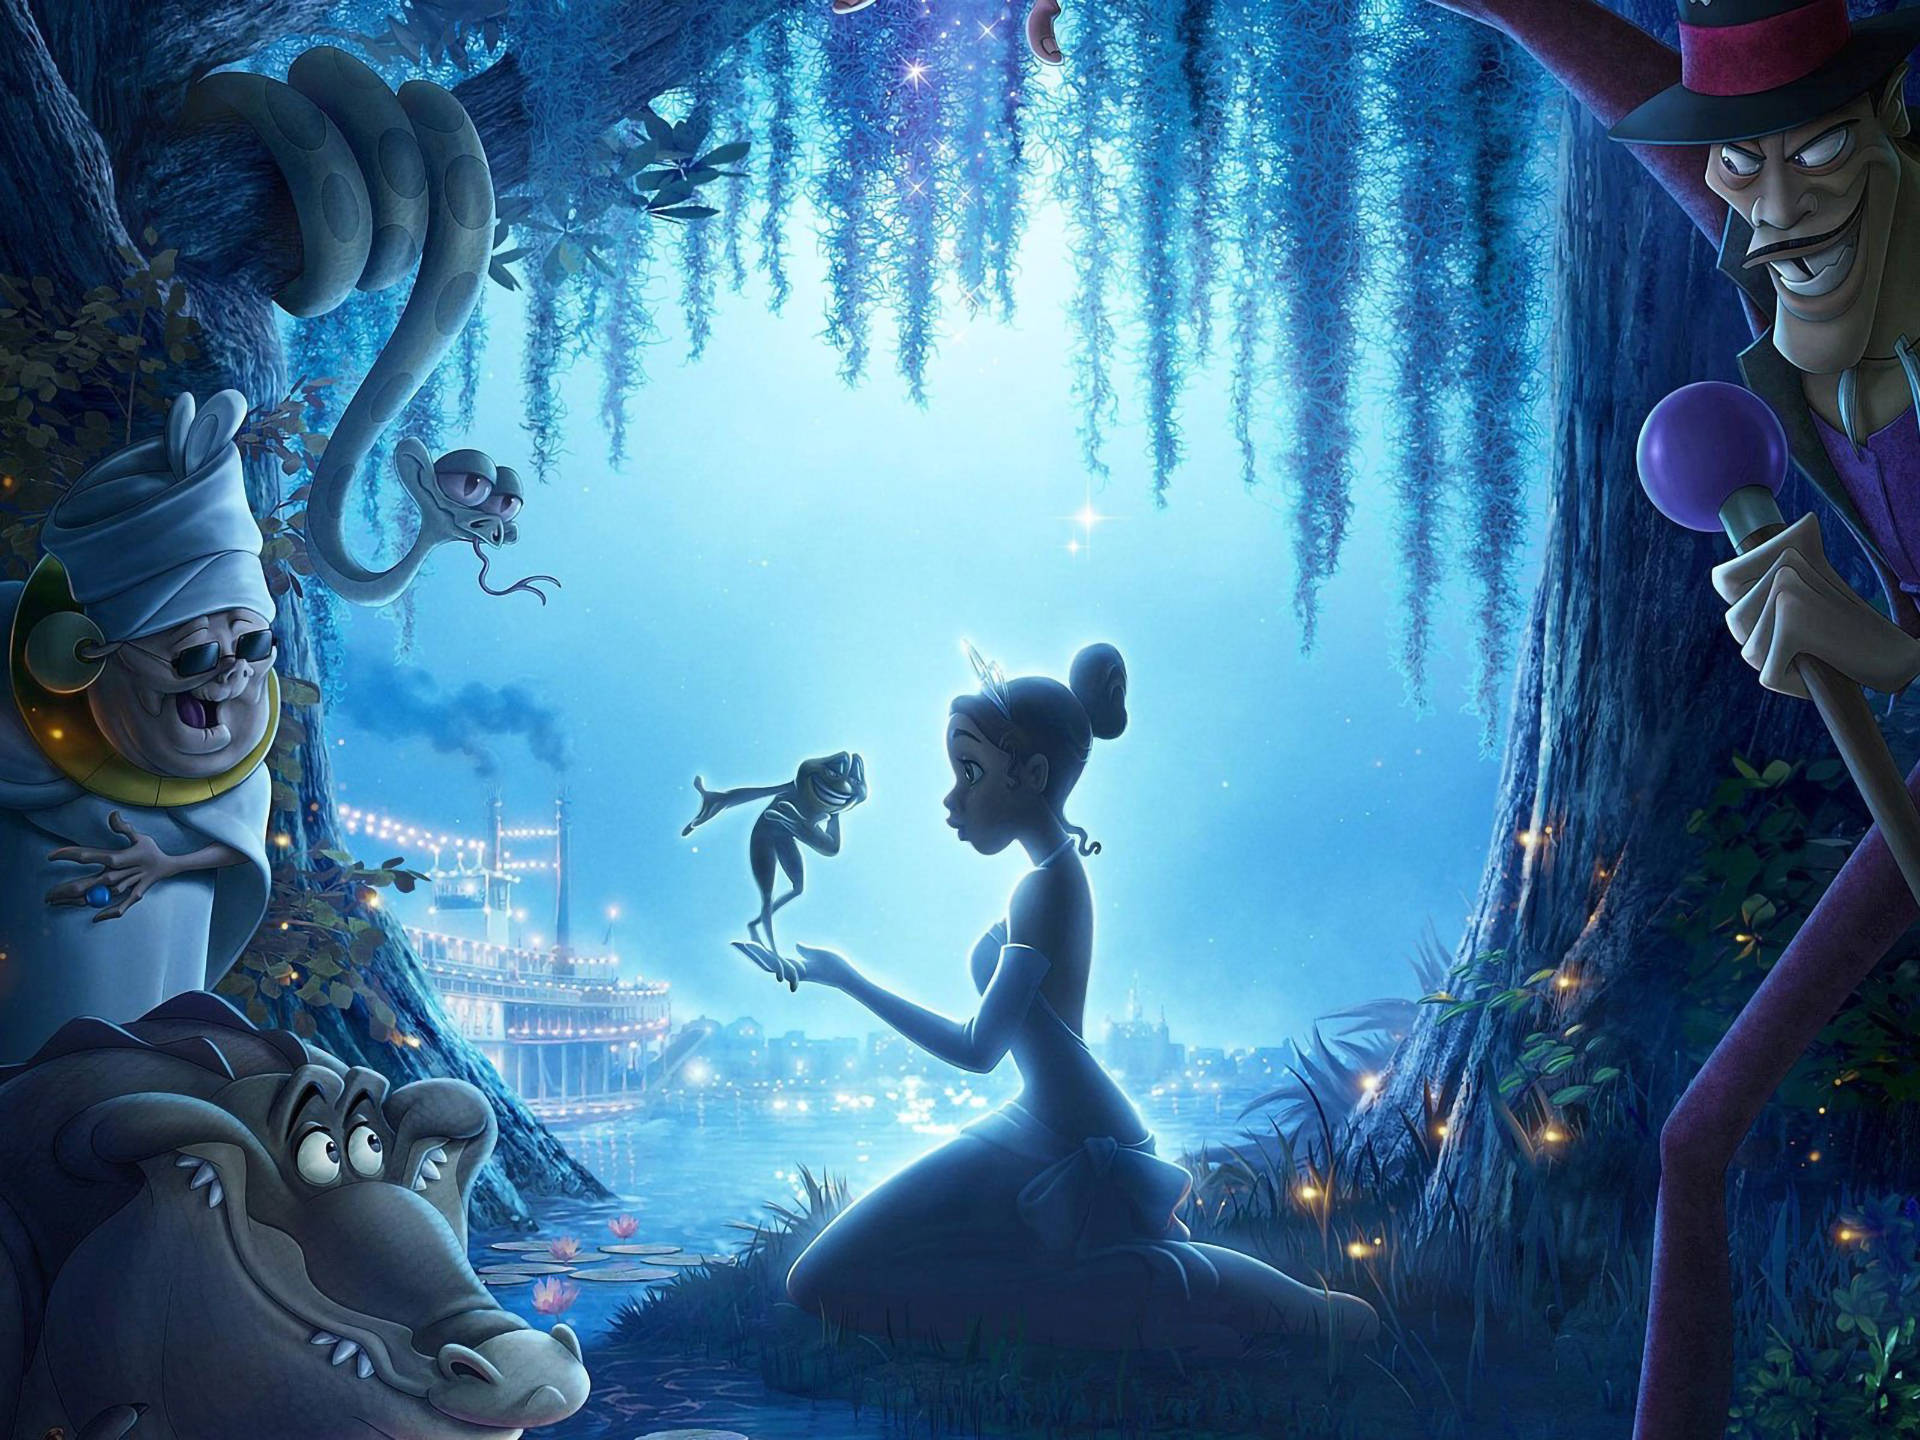 The Princess And The Frog Behind The Trees Wallpaper